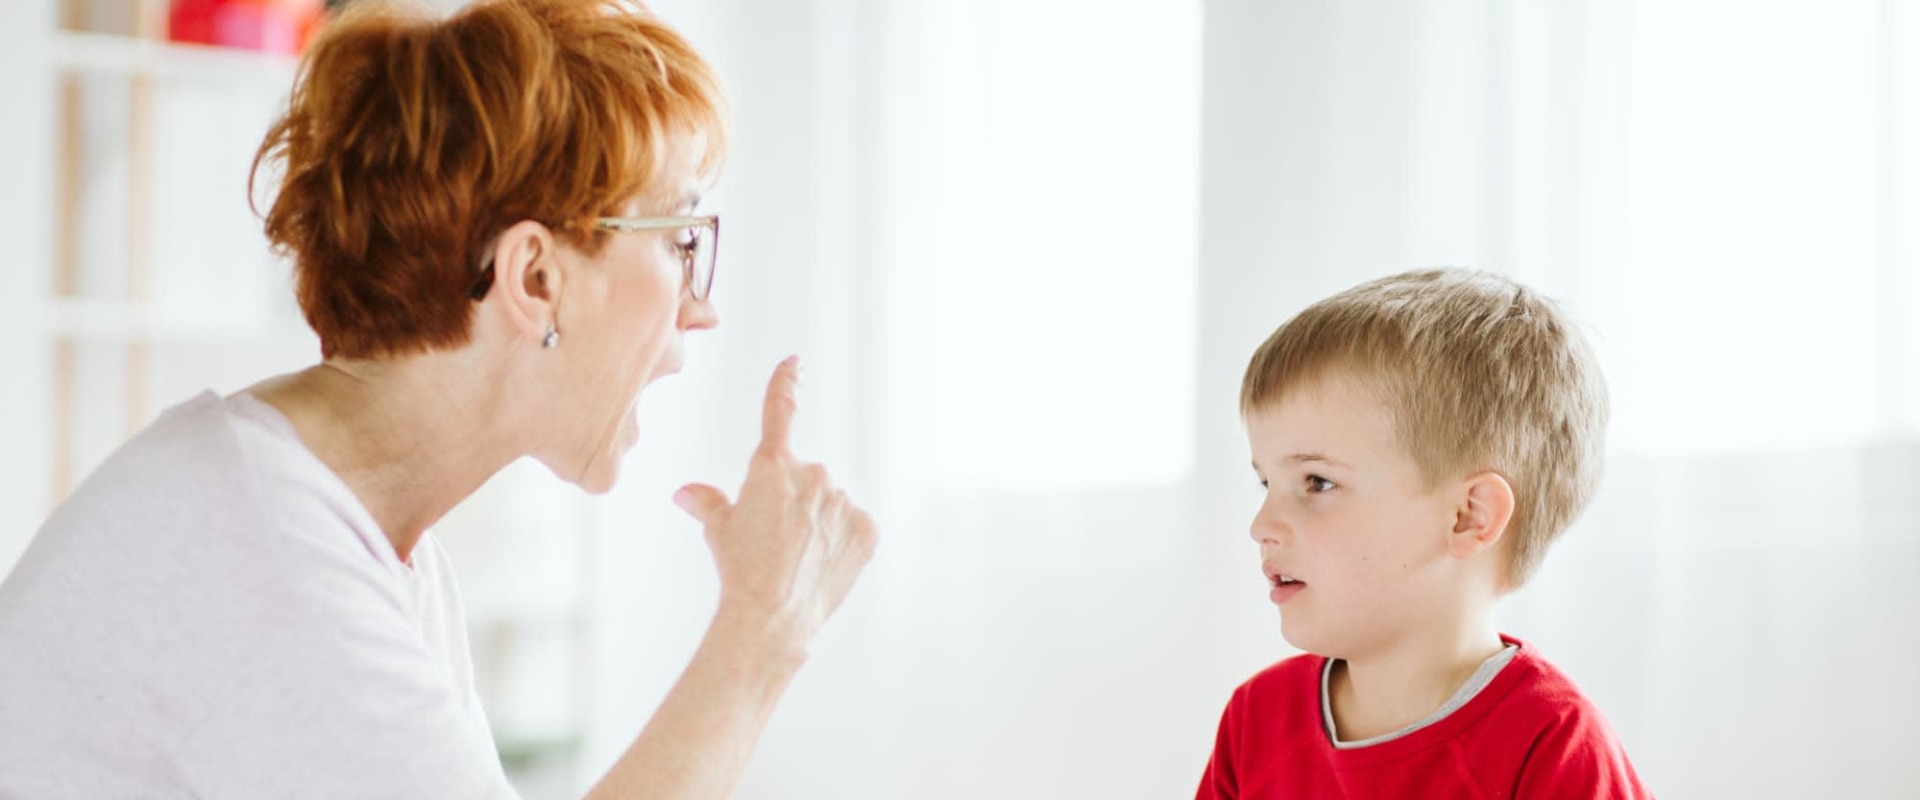 What Qualifications Should I Look for in a Speech Therapist?